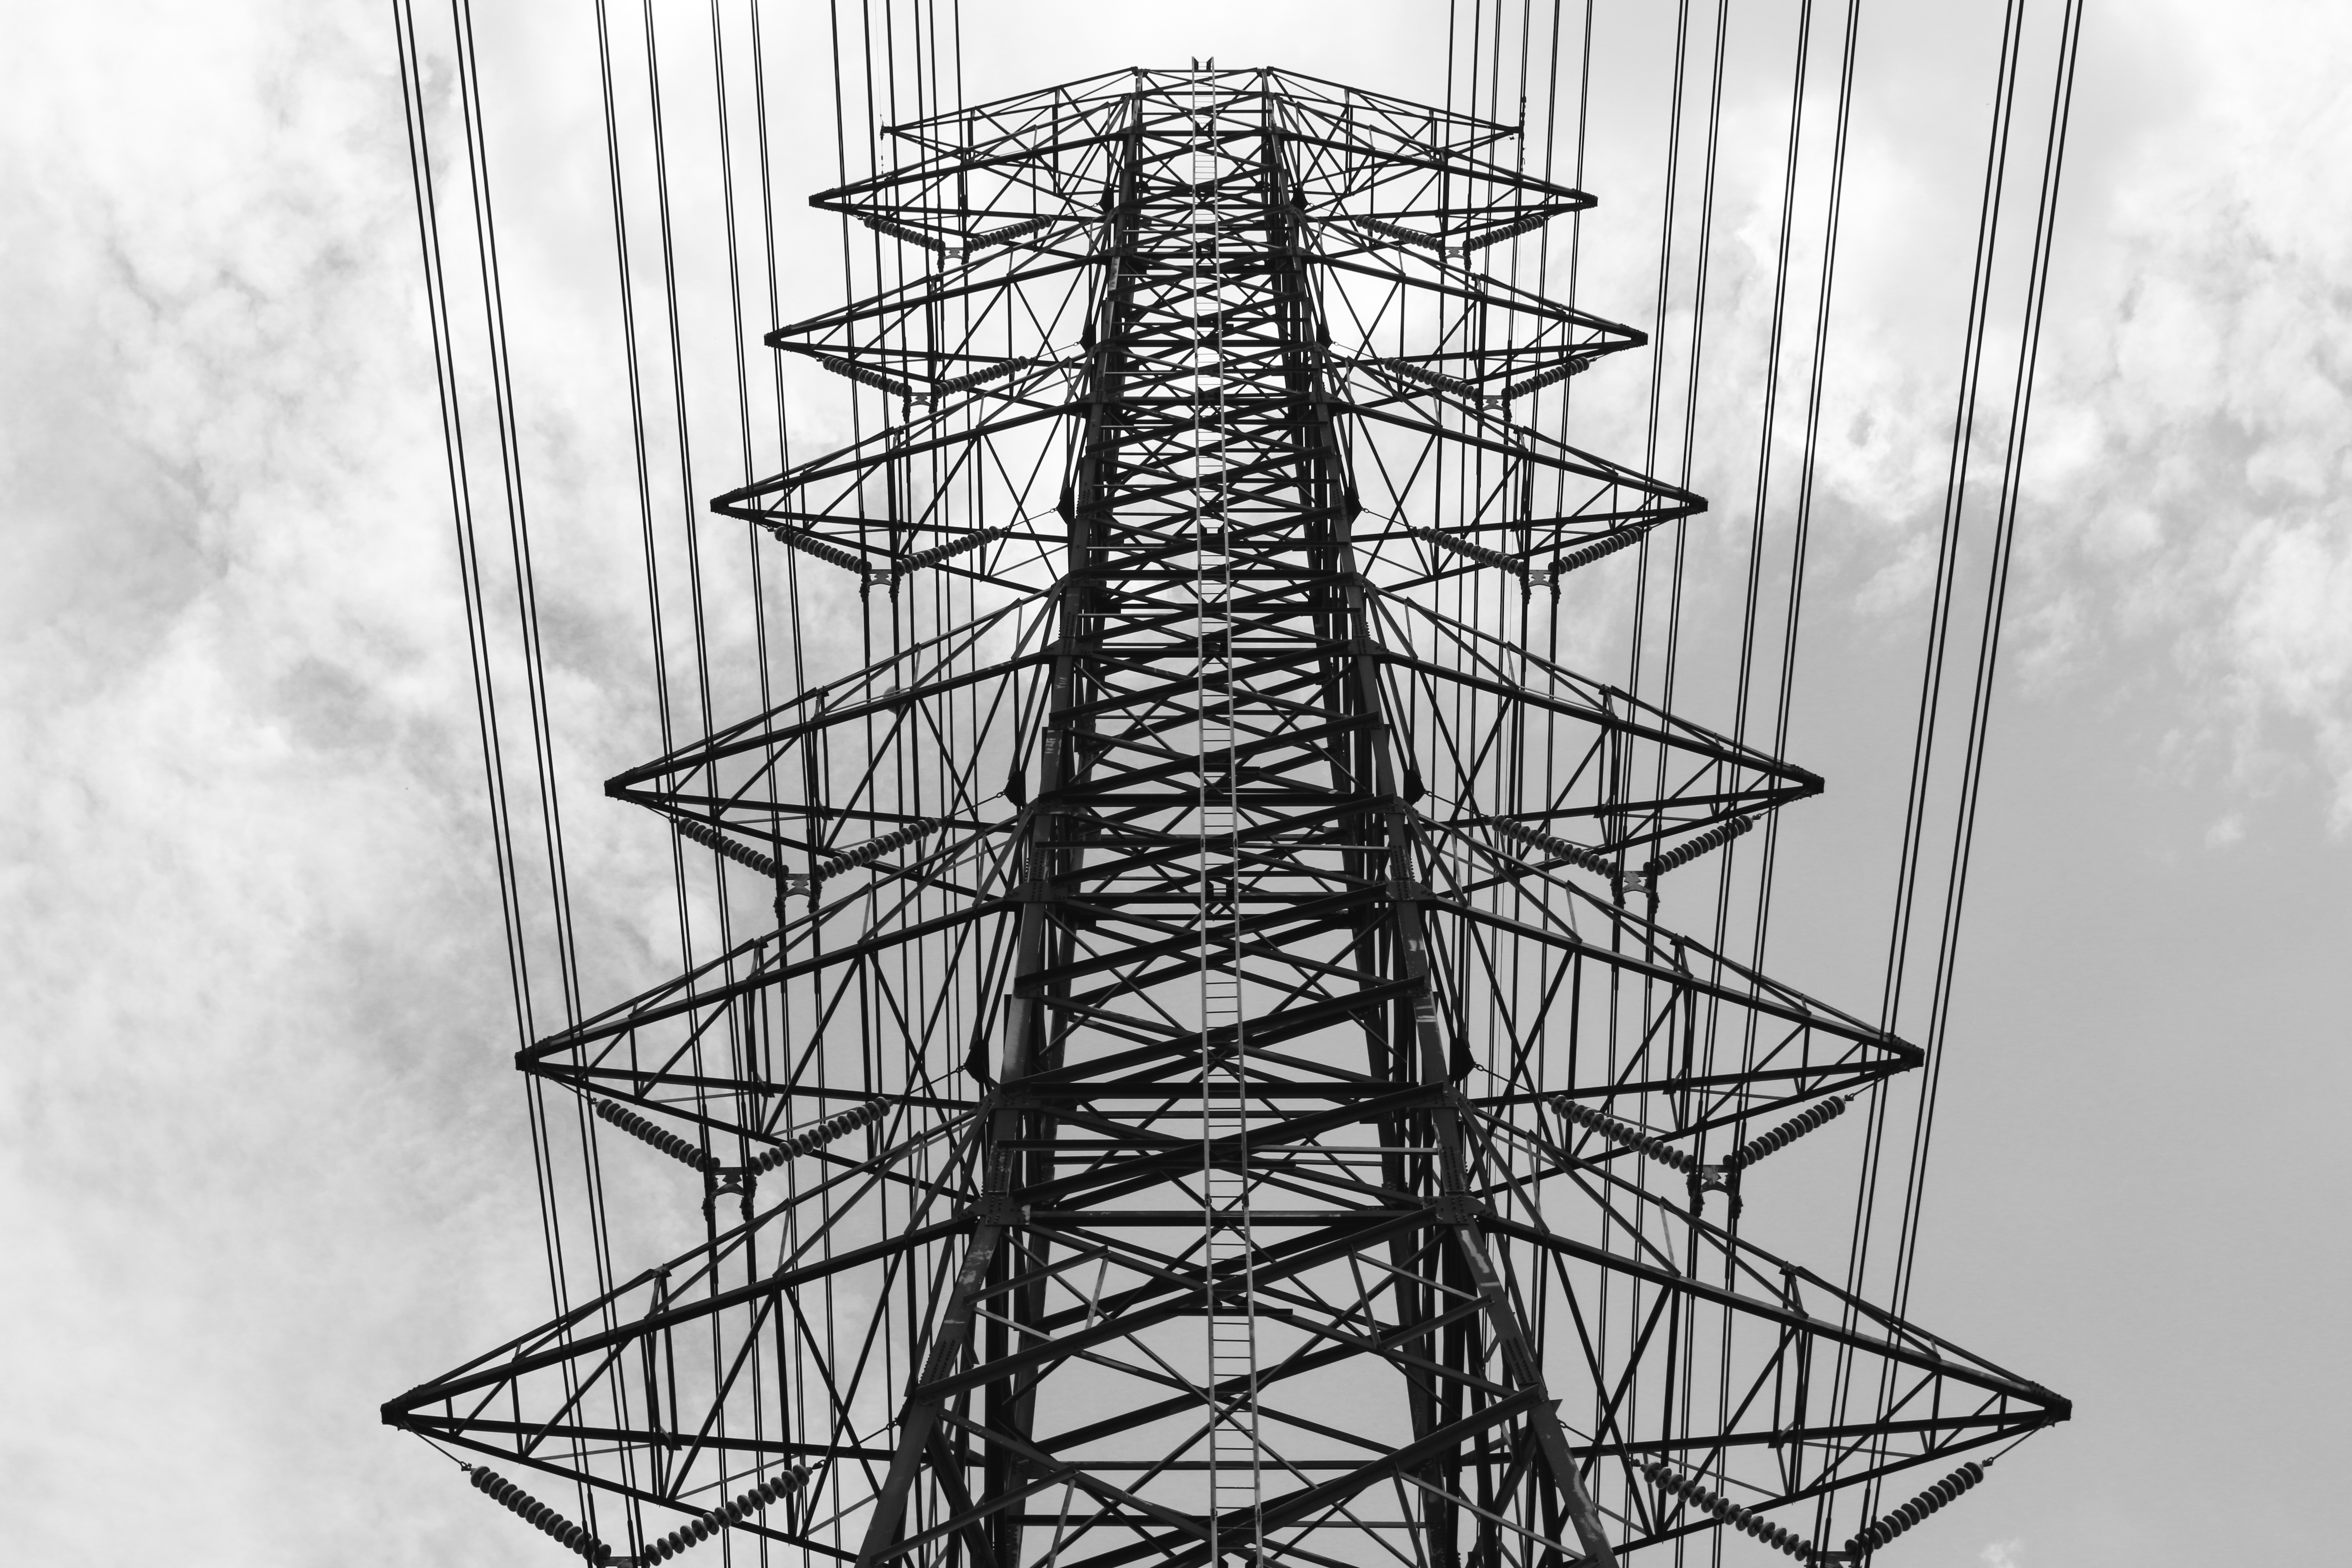 Eletric tower in black and white